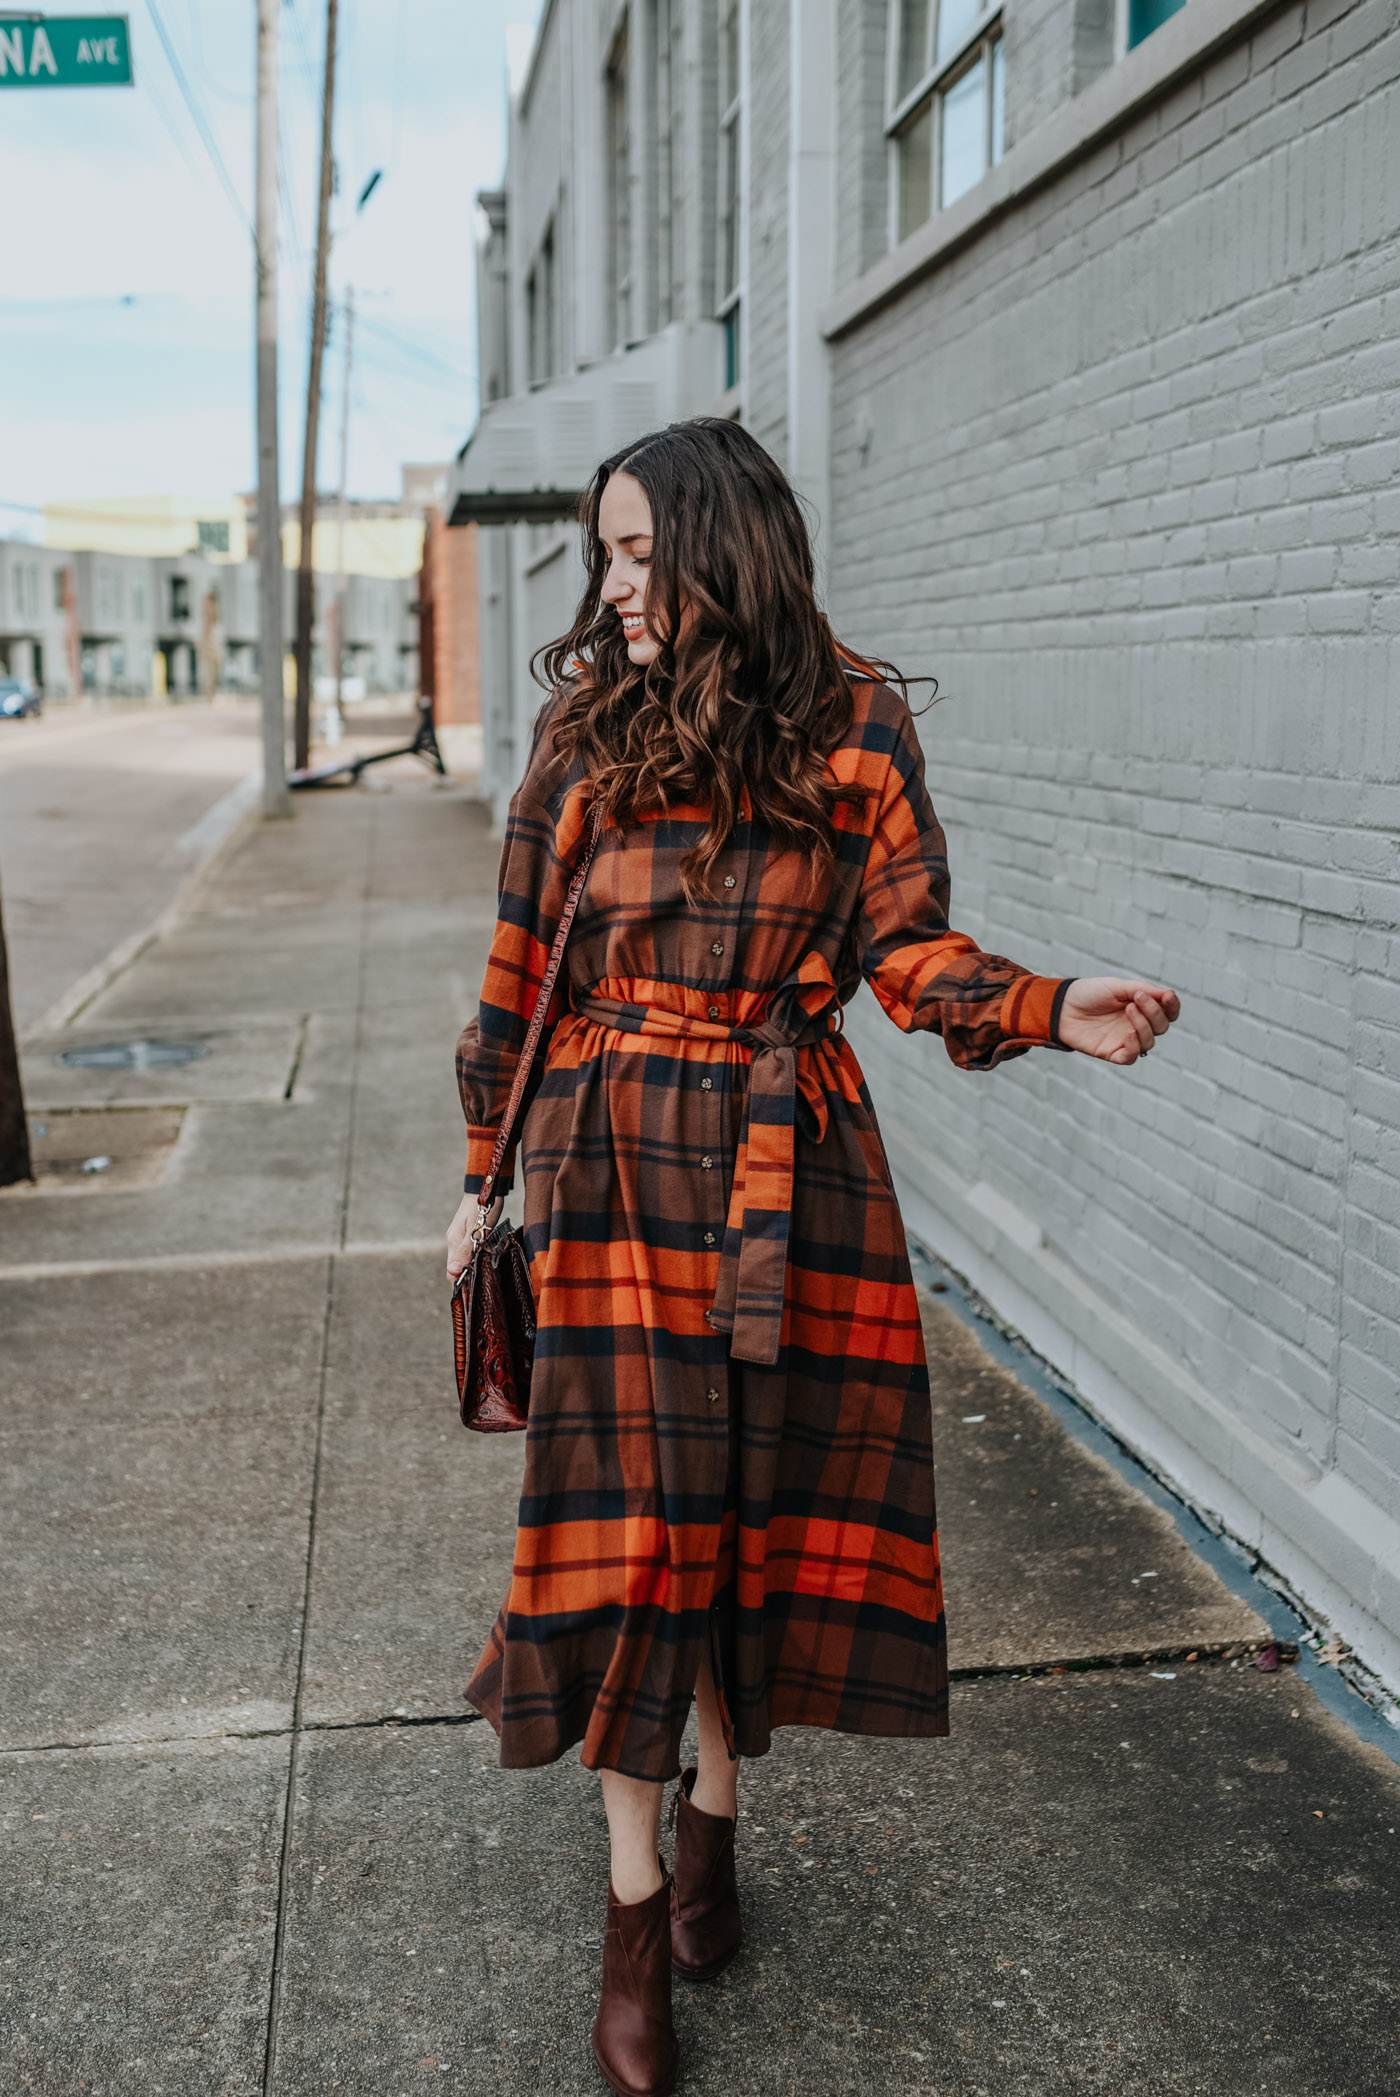 A Pretty (Warm) Plaid Shirt Dress by popular Tennessee fashion blog, Lone Star Looking Glass: image of a woman outside wearing an orange Nuuly Checkered Shirtdress.